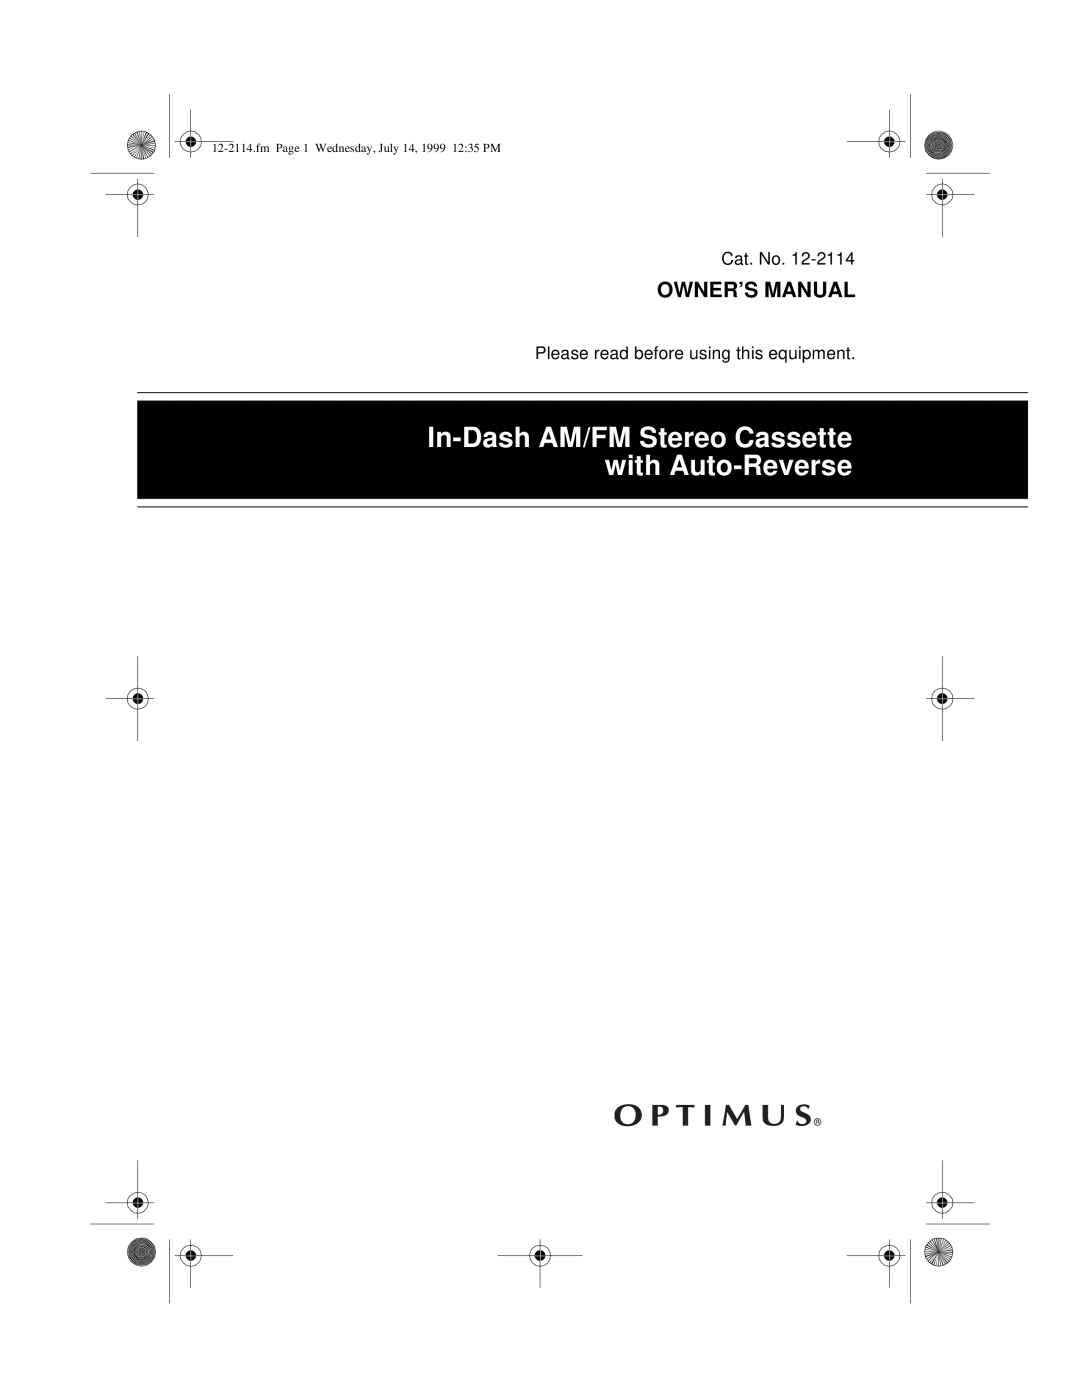 Optimus 12-2114, 4301-3838-0 owner manual In-DashAM/FM Stereo Cassette with Auto-Reverse 